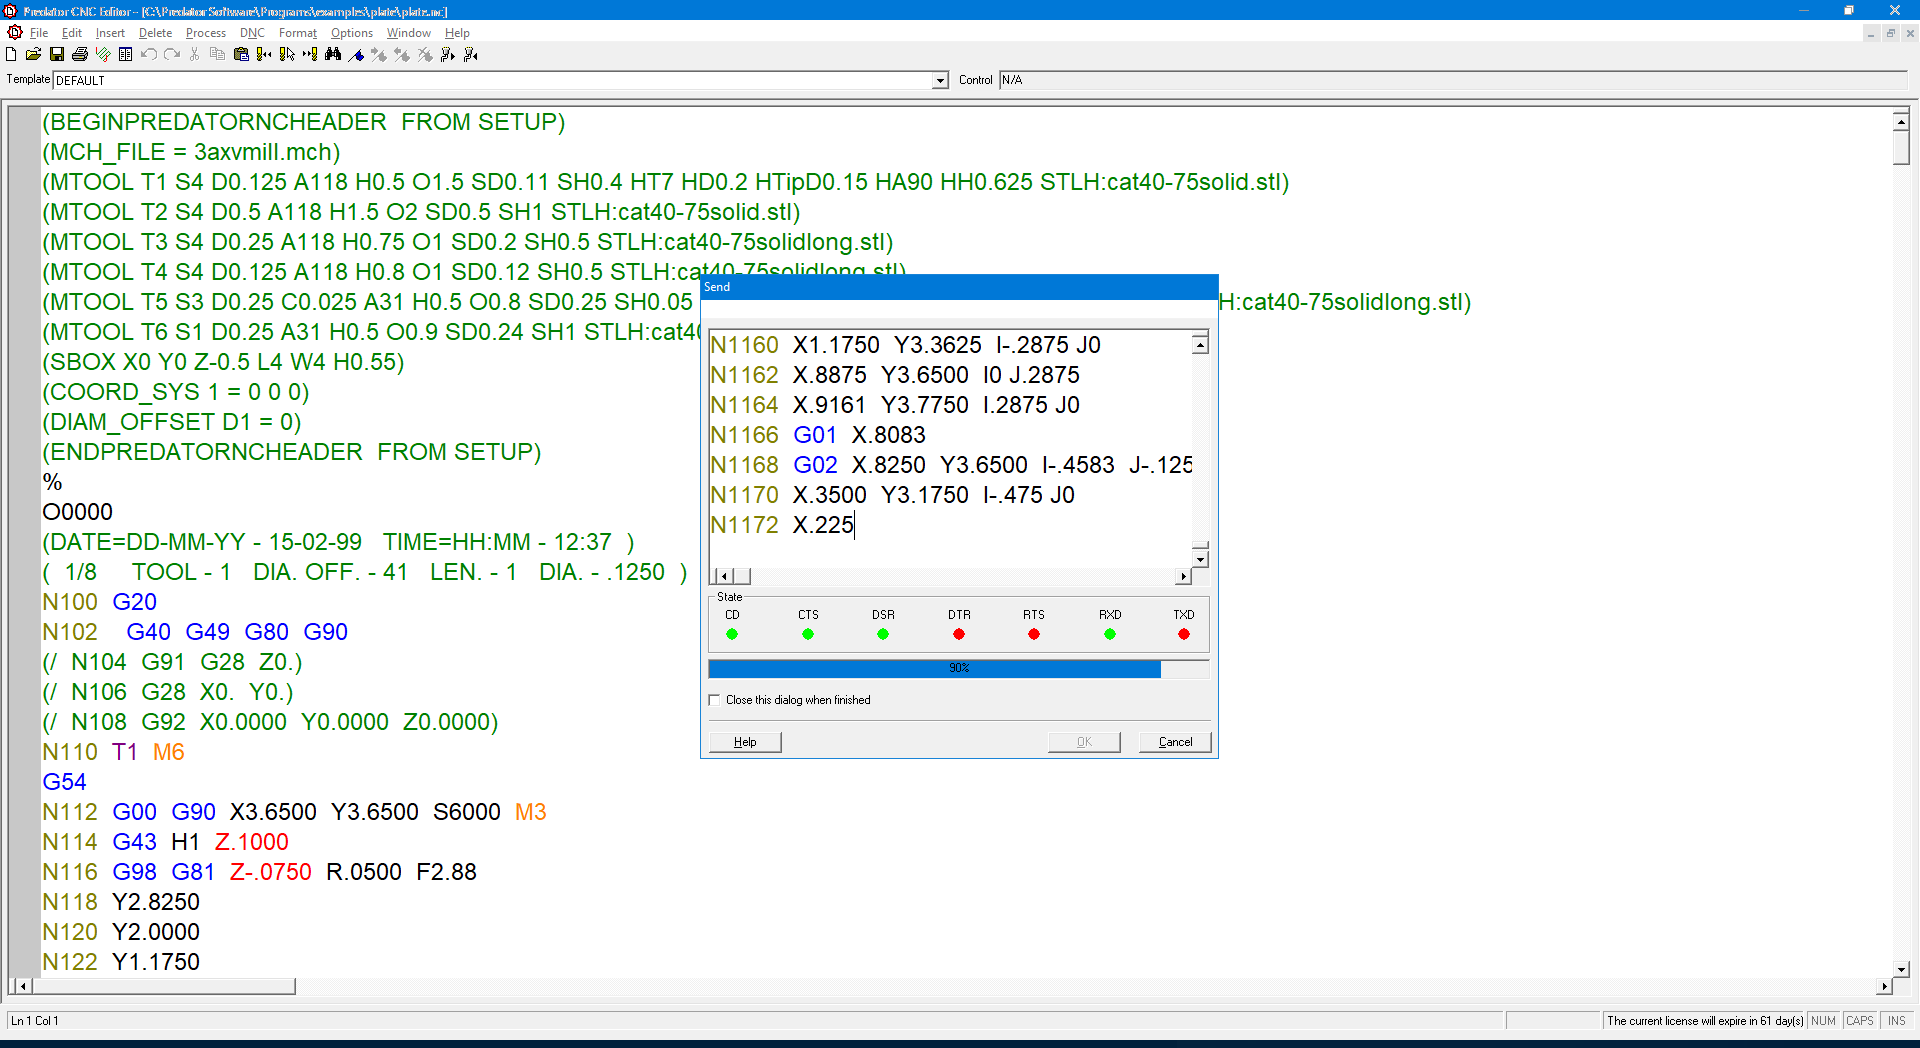 Predator CNC Editor with RS232 communications